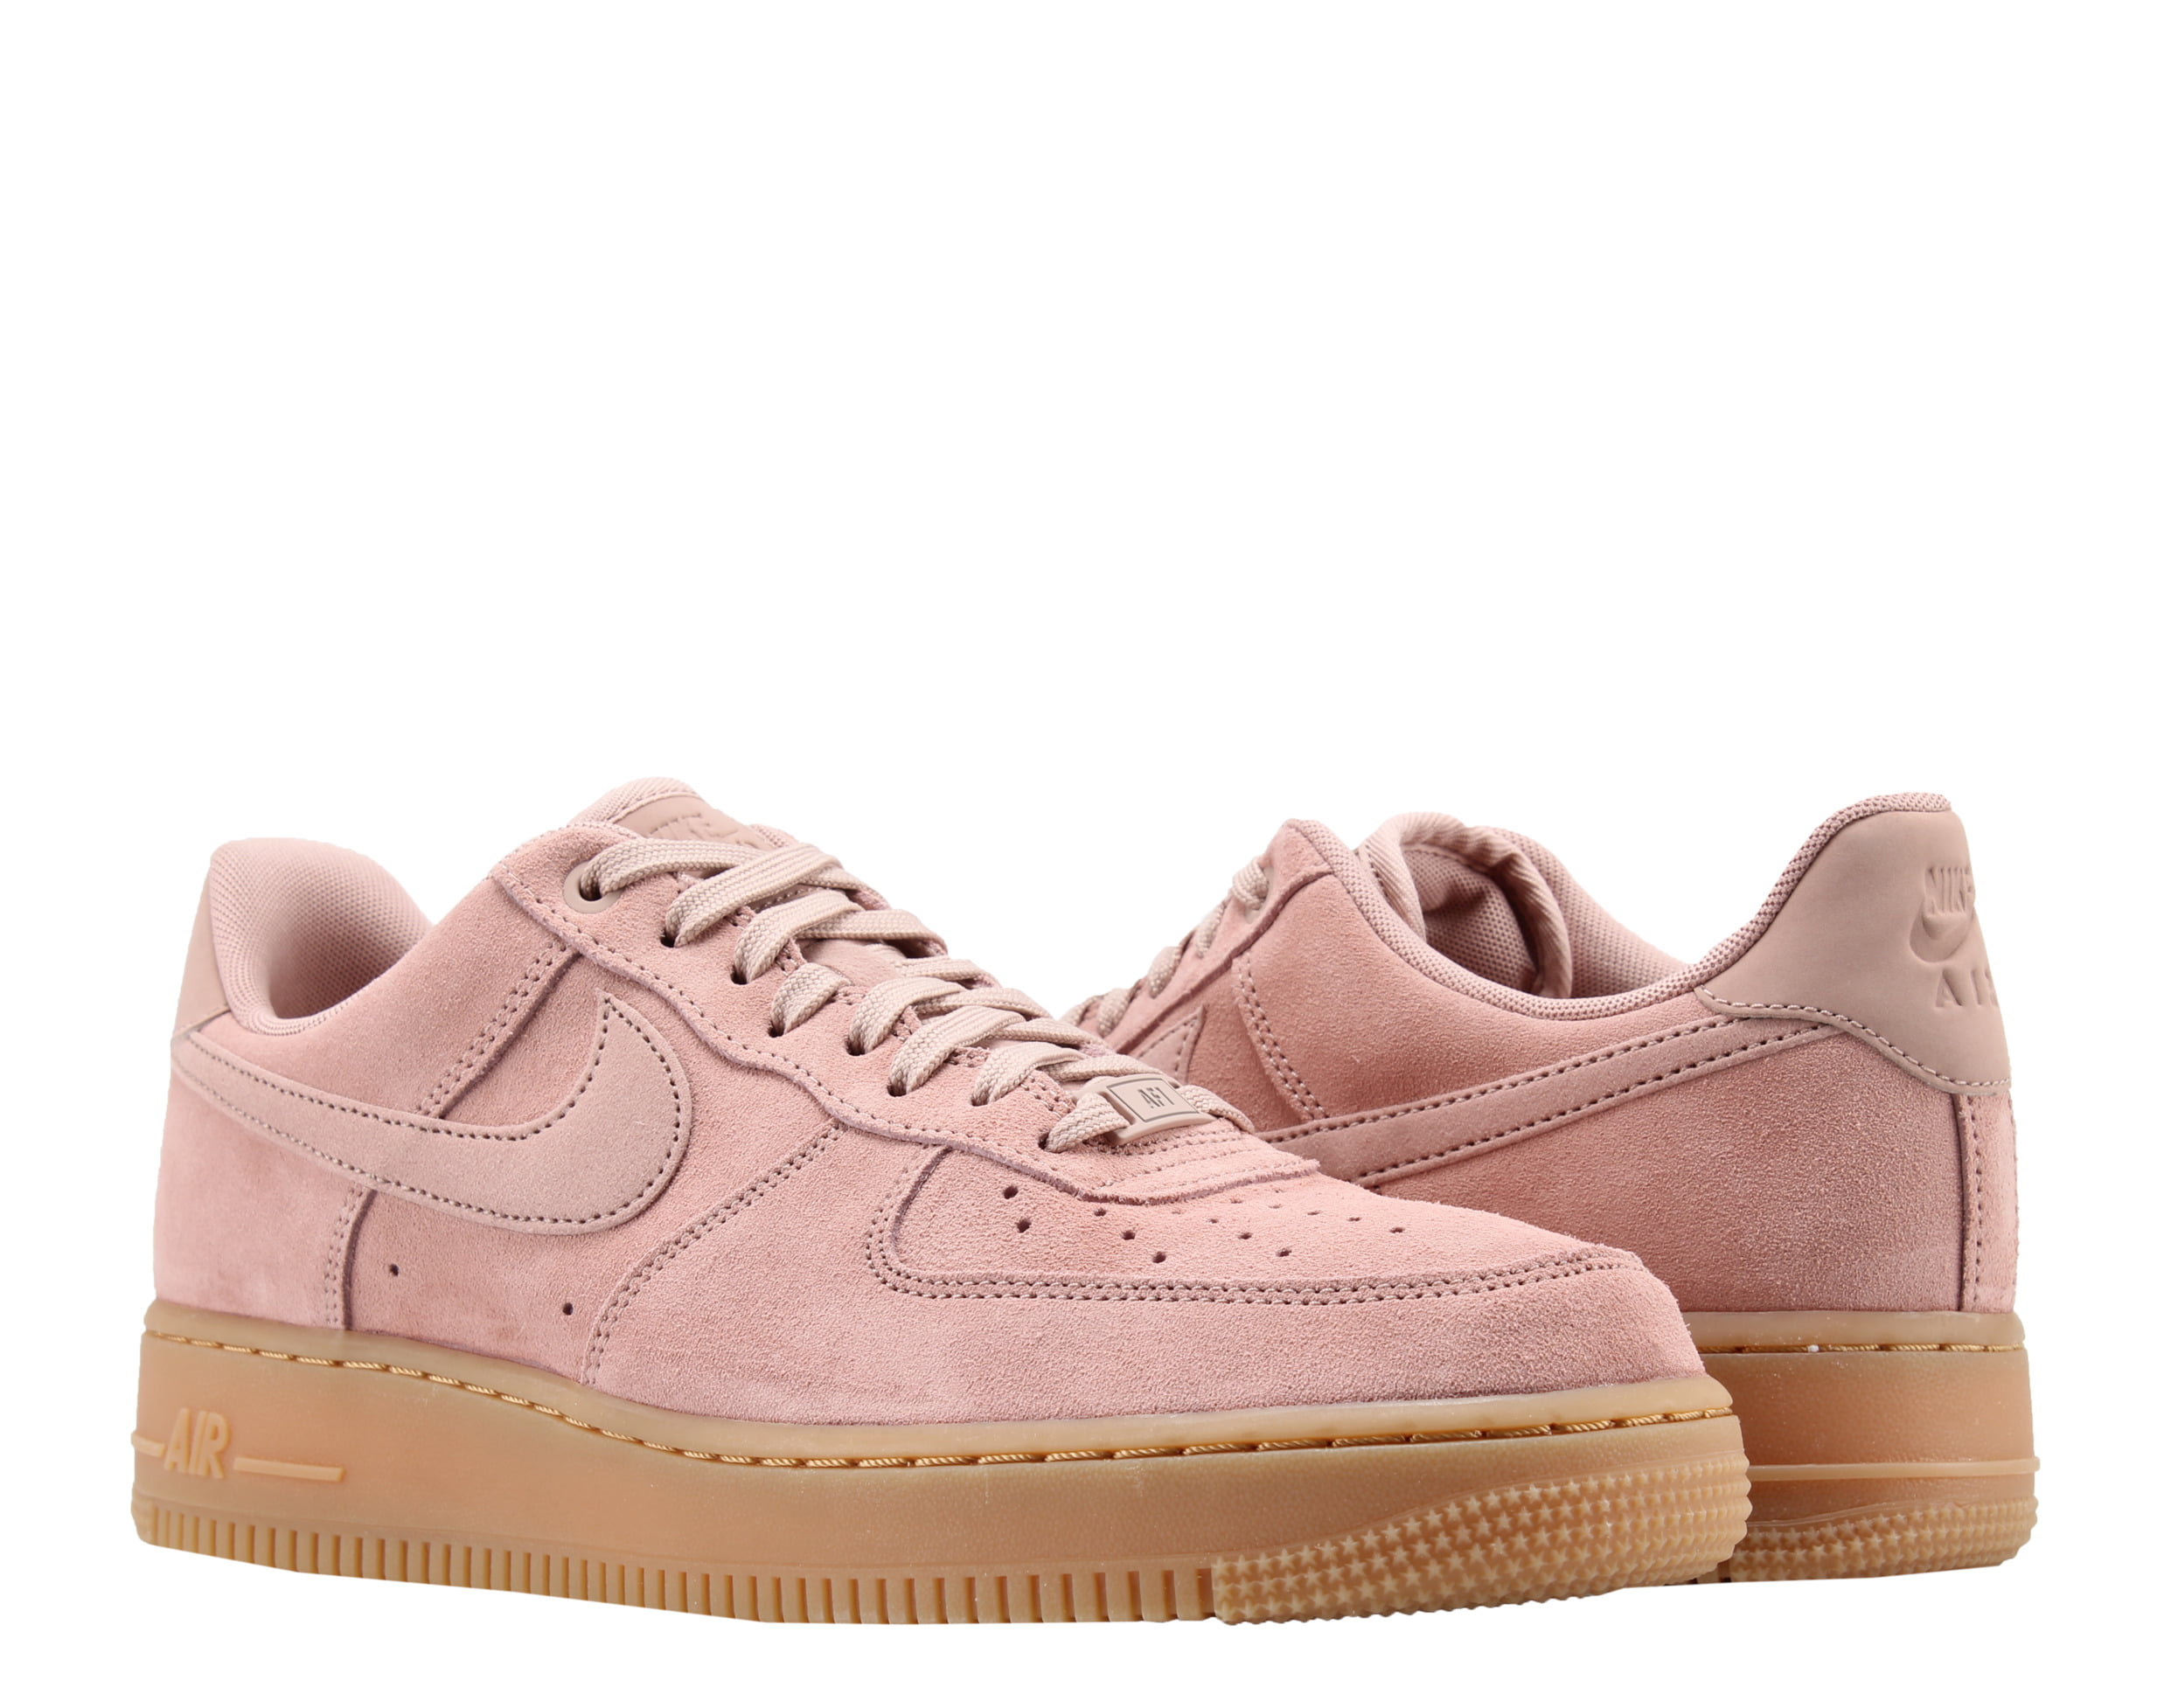 Nike Men's Air Force 1 07 LV8 Suede Shoes -